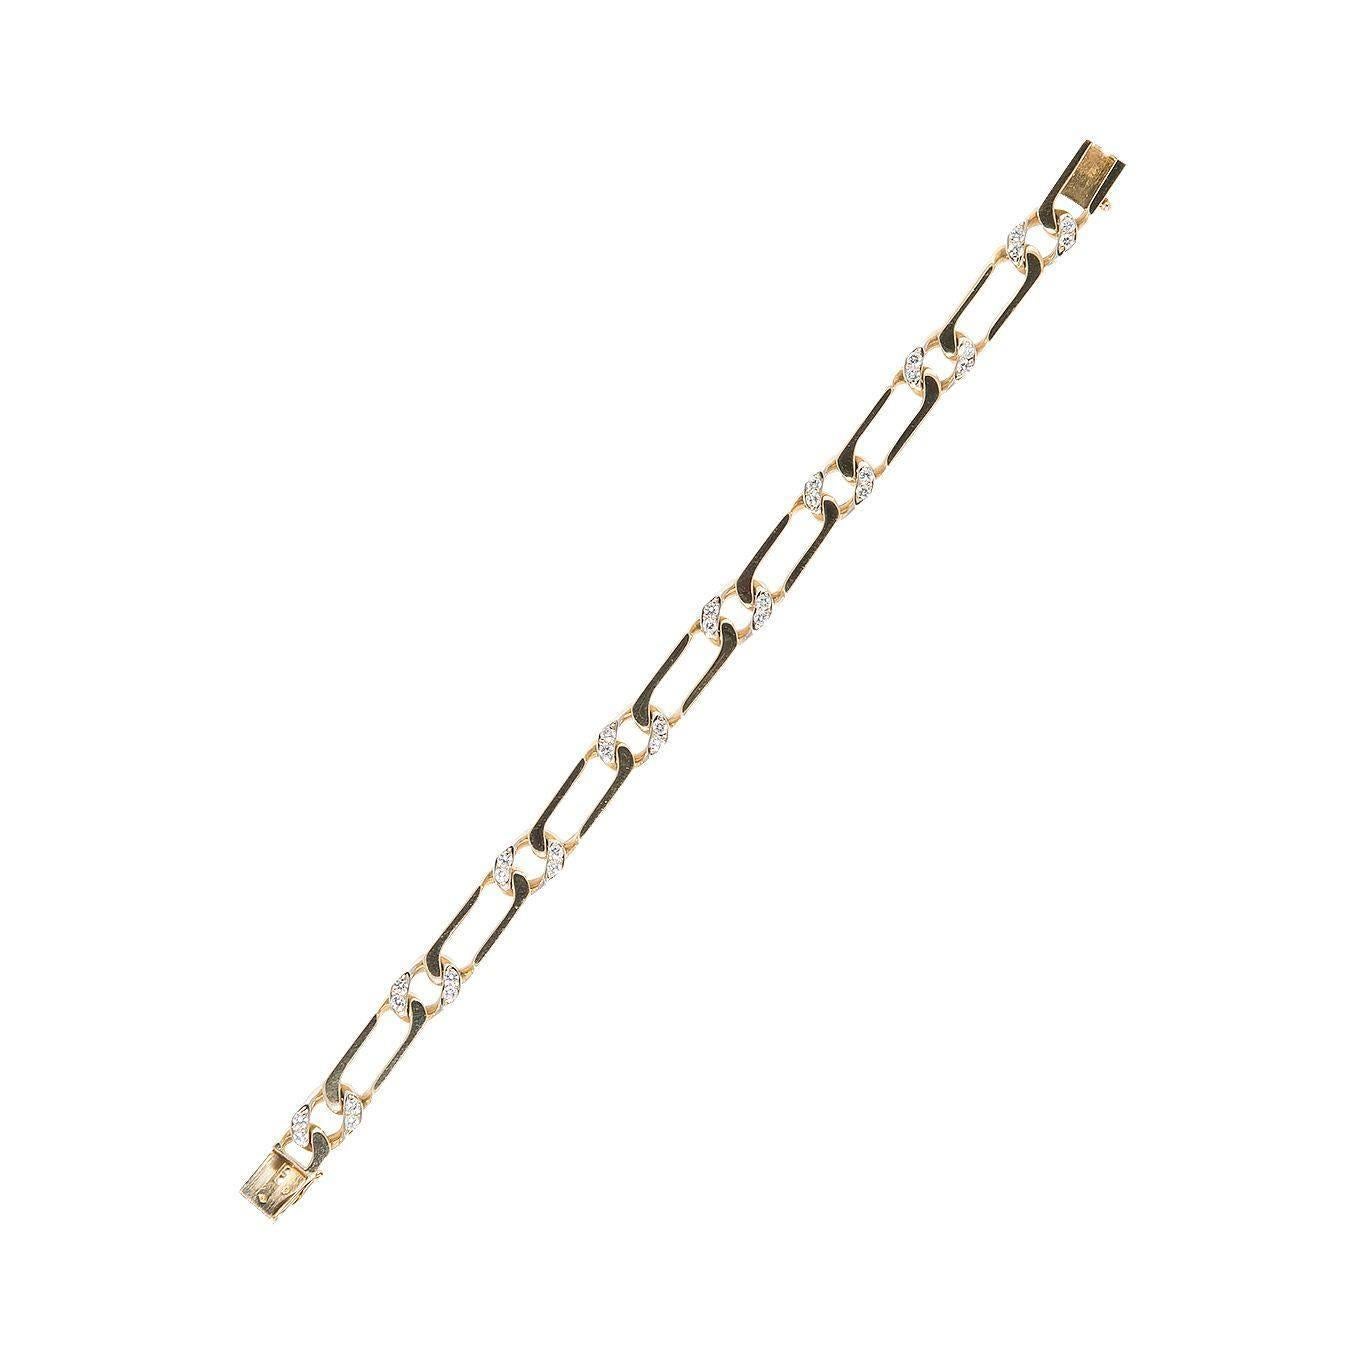 VAN CLEEF & ARPELS Seventies Bracelet yellow gold chain link, six patterns set with diamonds, signed and numbered B2174A66, length 19 cm, width 0,7 cm (34,25 grams)